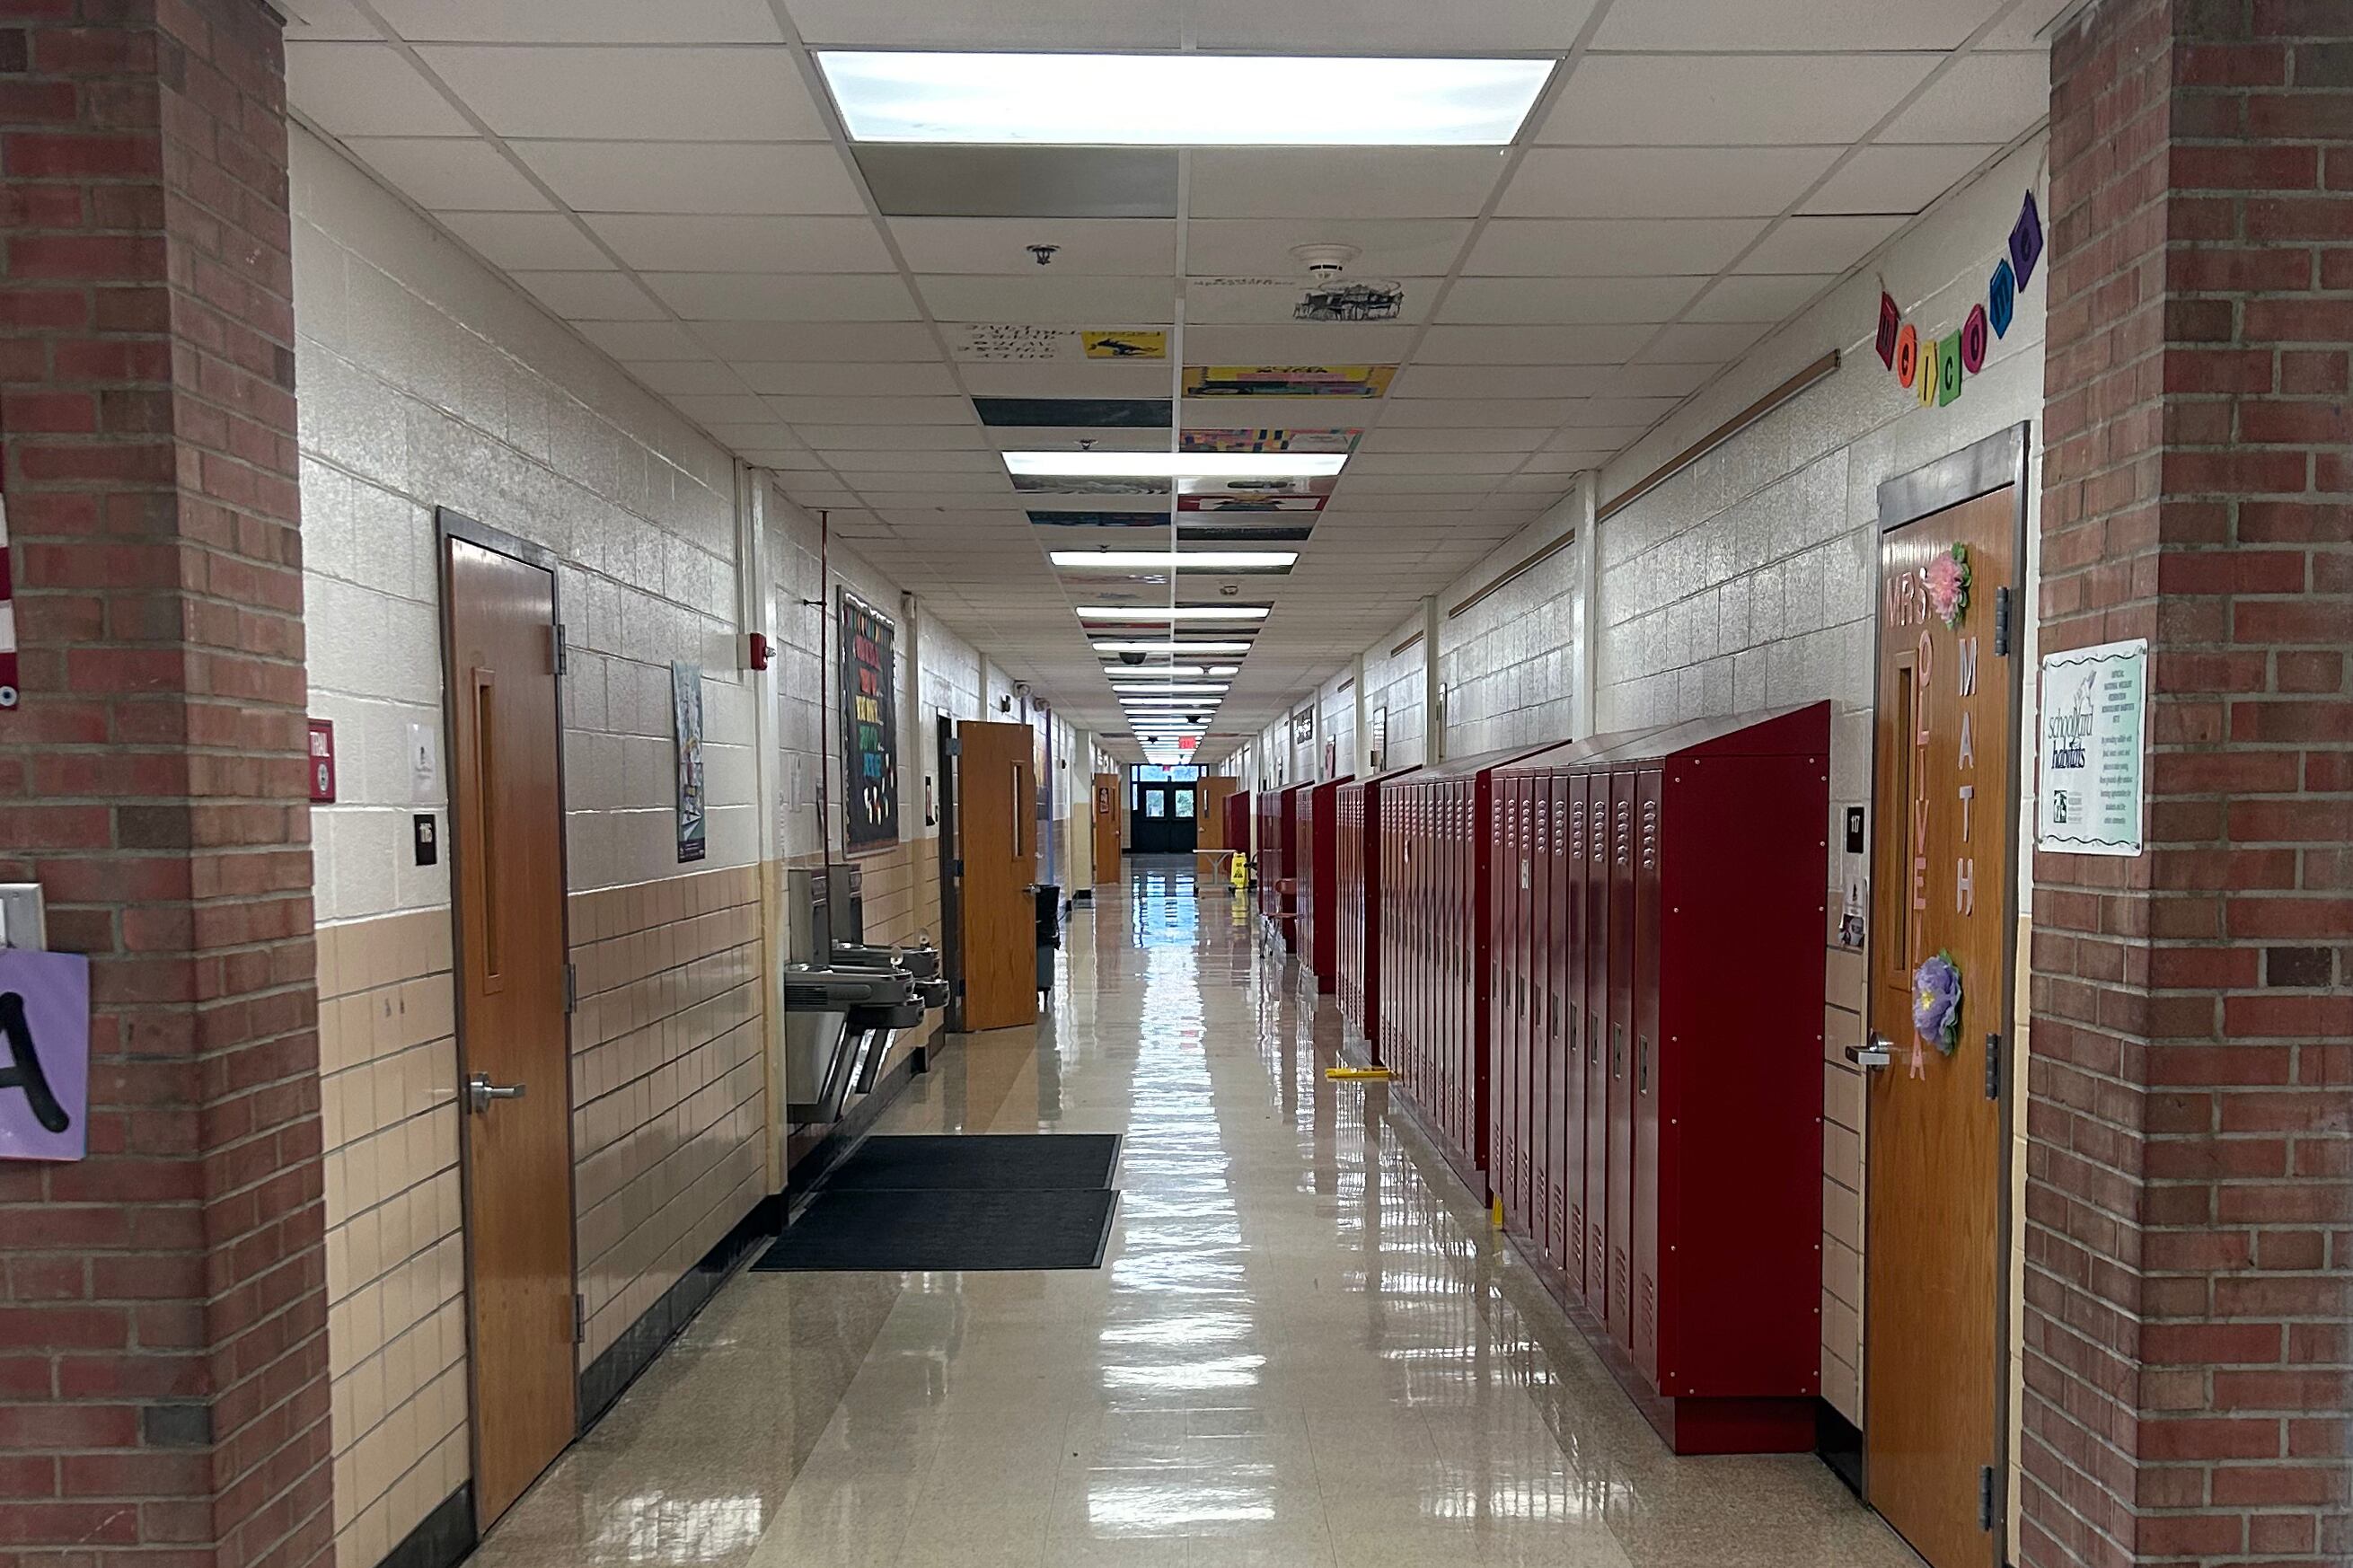 A picture of a school hallway, with classroom doors on either side of the hall.